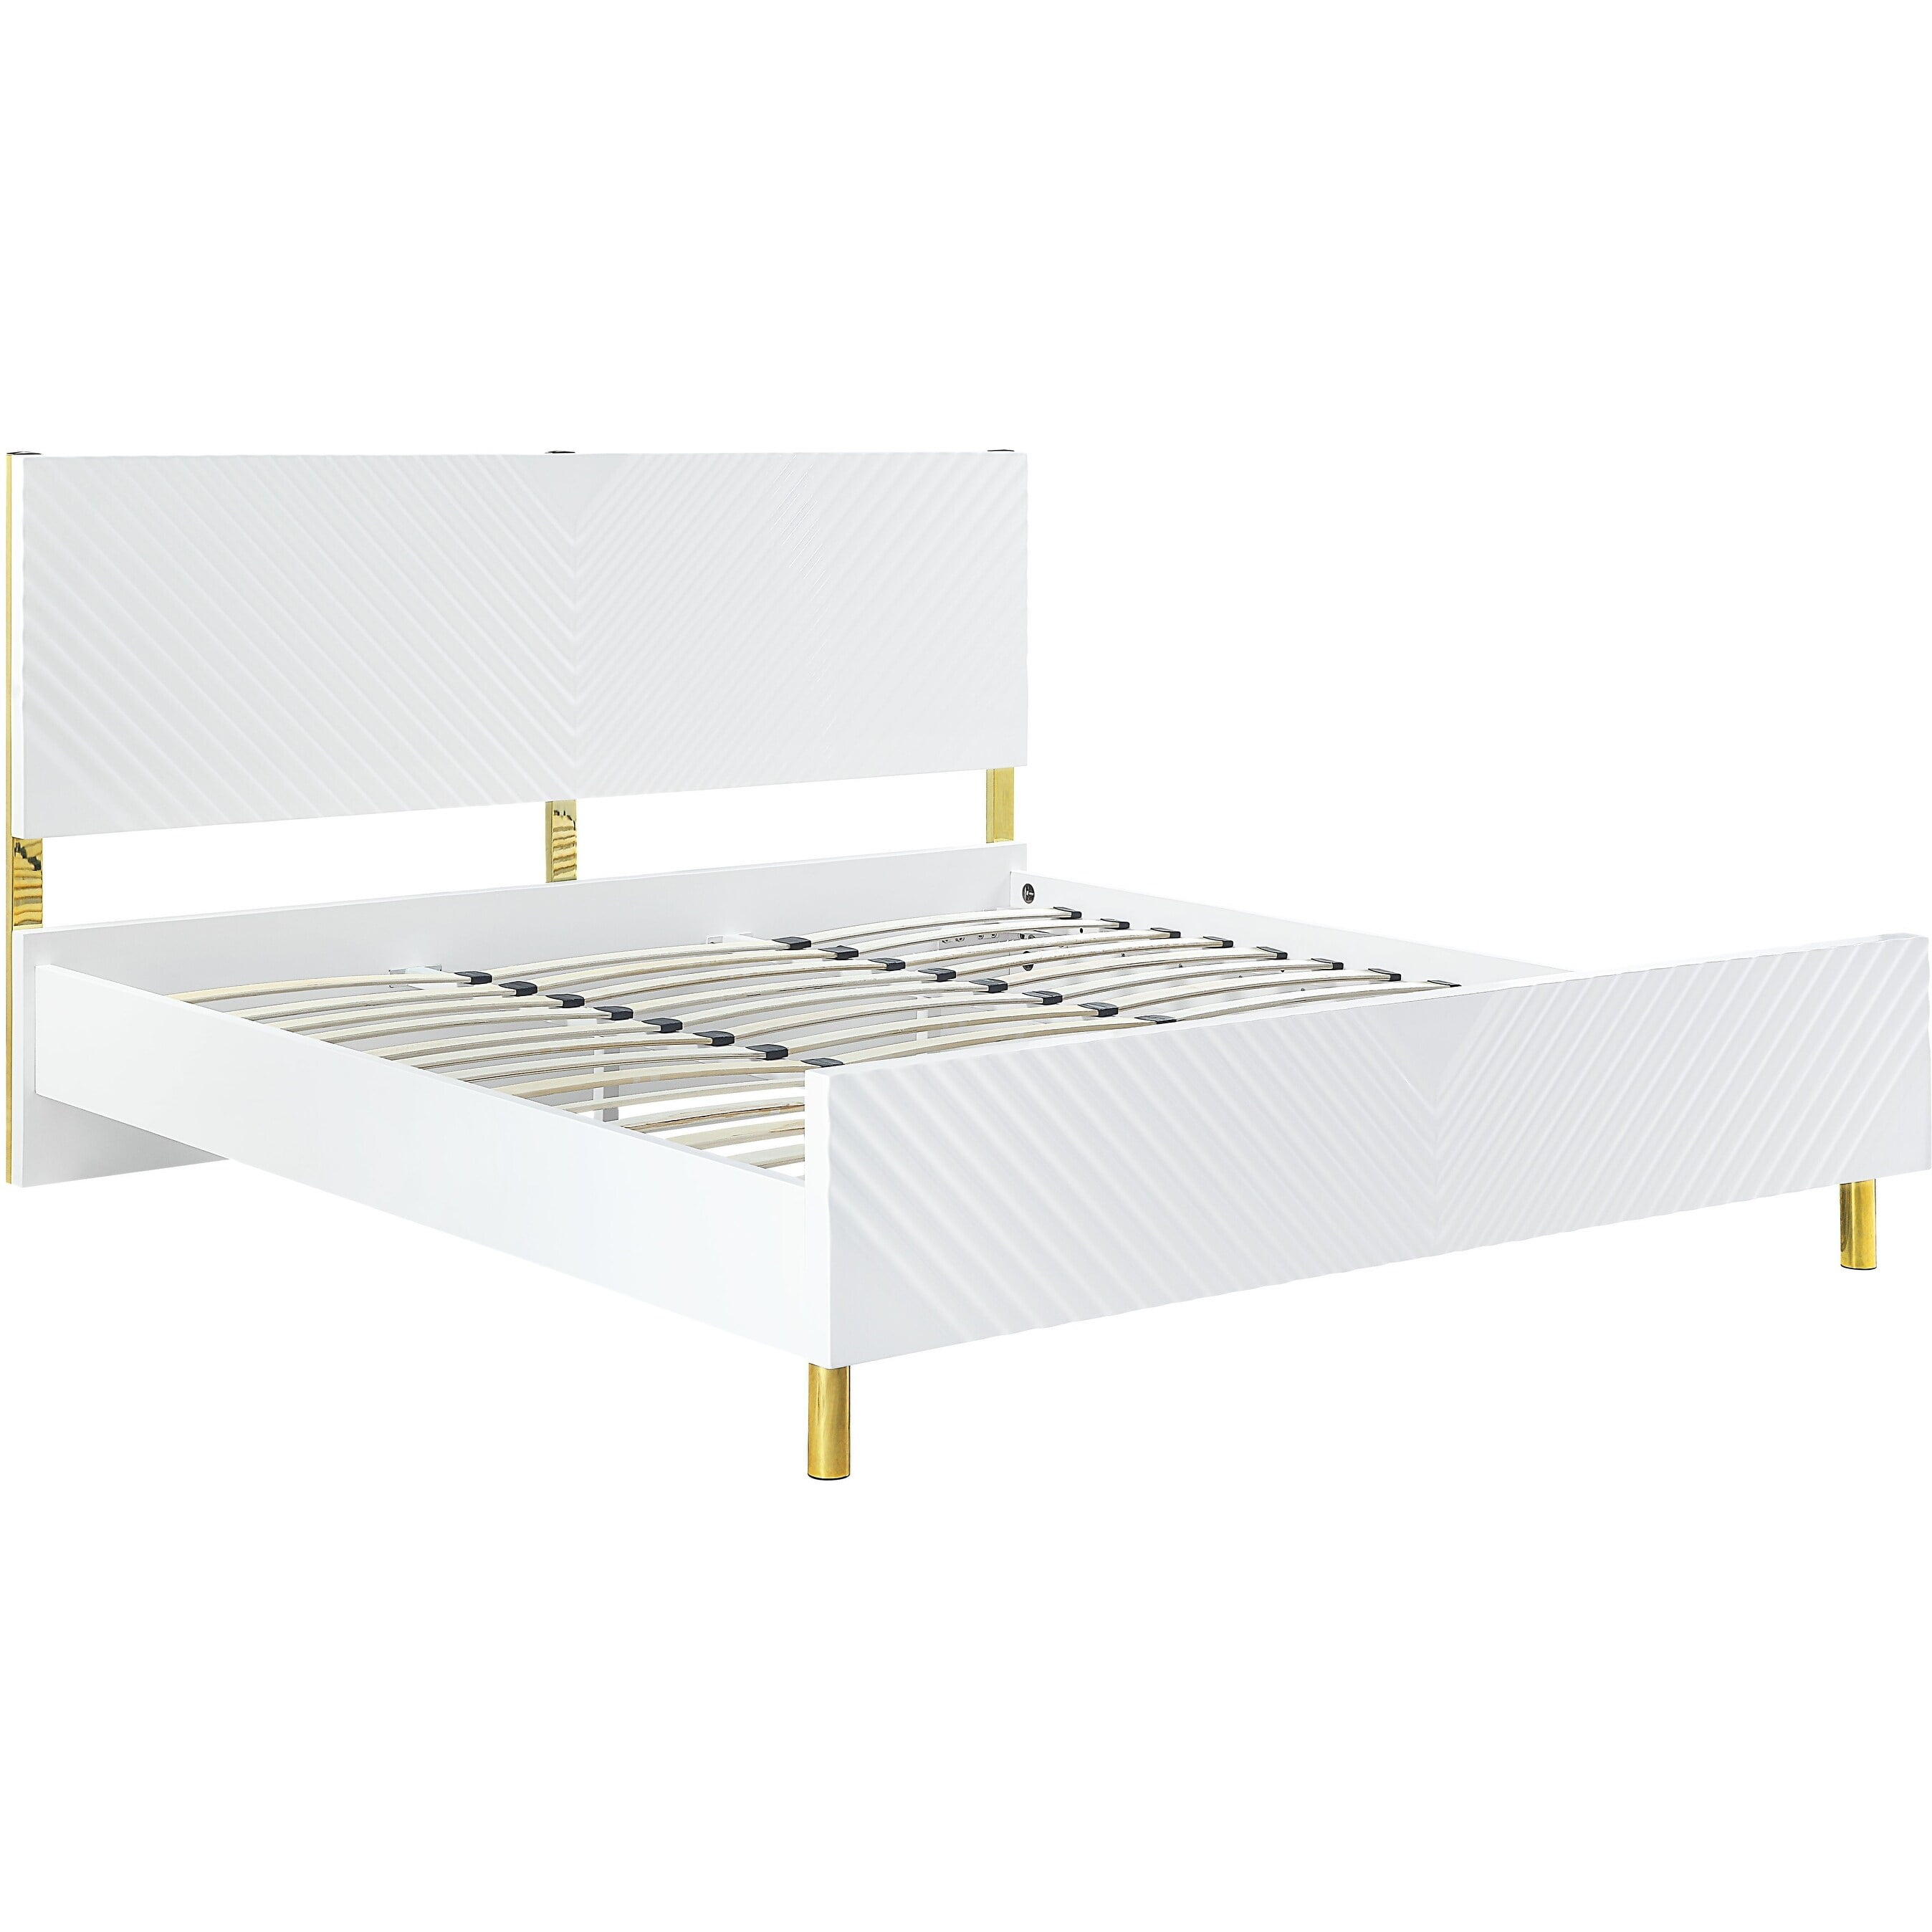 Picture of Acme Furniture BD01033EK 86 x 81 x 46 in. Gaines Eastern Bed, White High Gloss - King Size